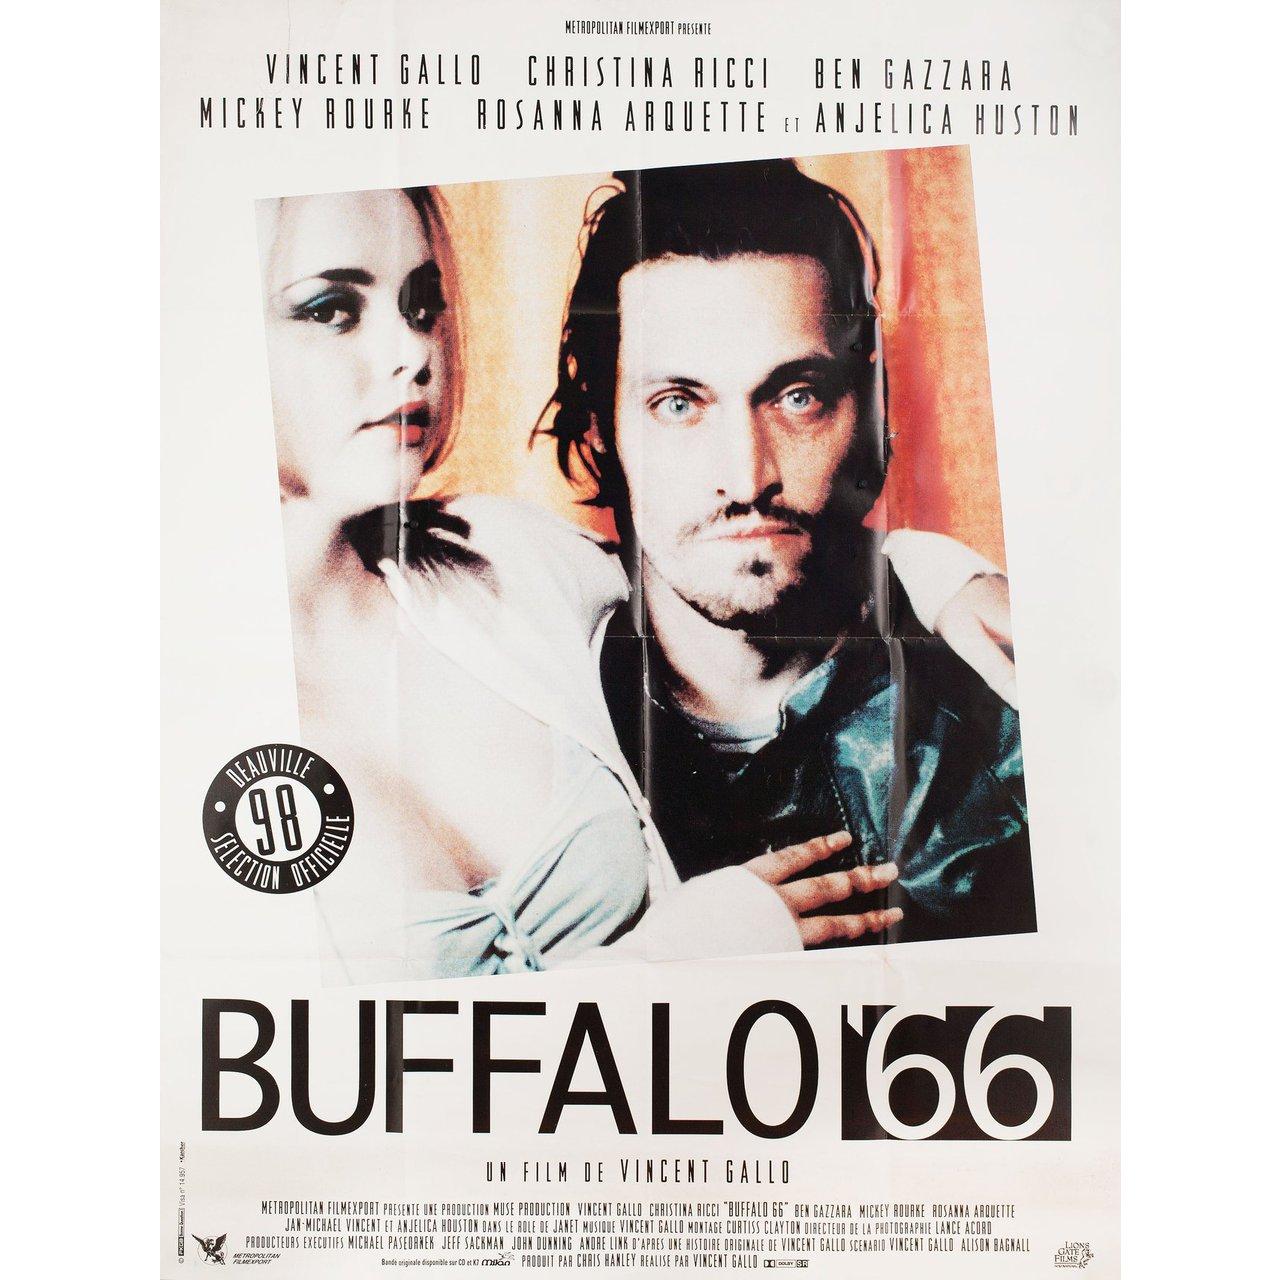 Original 1998 French grande poster for the film ‘Buffalo’ '66 directed by Vincent Gallo with Vincent Gallo / Christina Ricci / Ben Gazzara / Mickey Rourke. Very good-fine condition, folded. Many original posters were issued folded or were